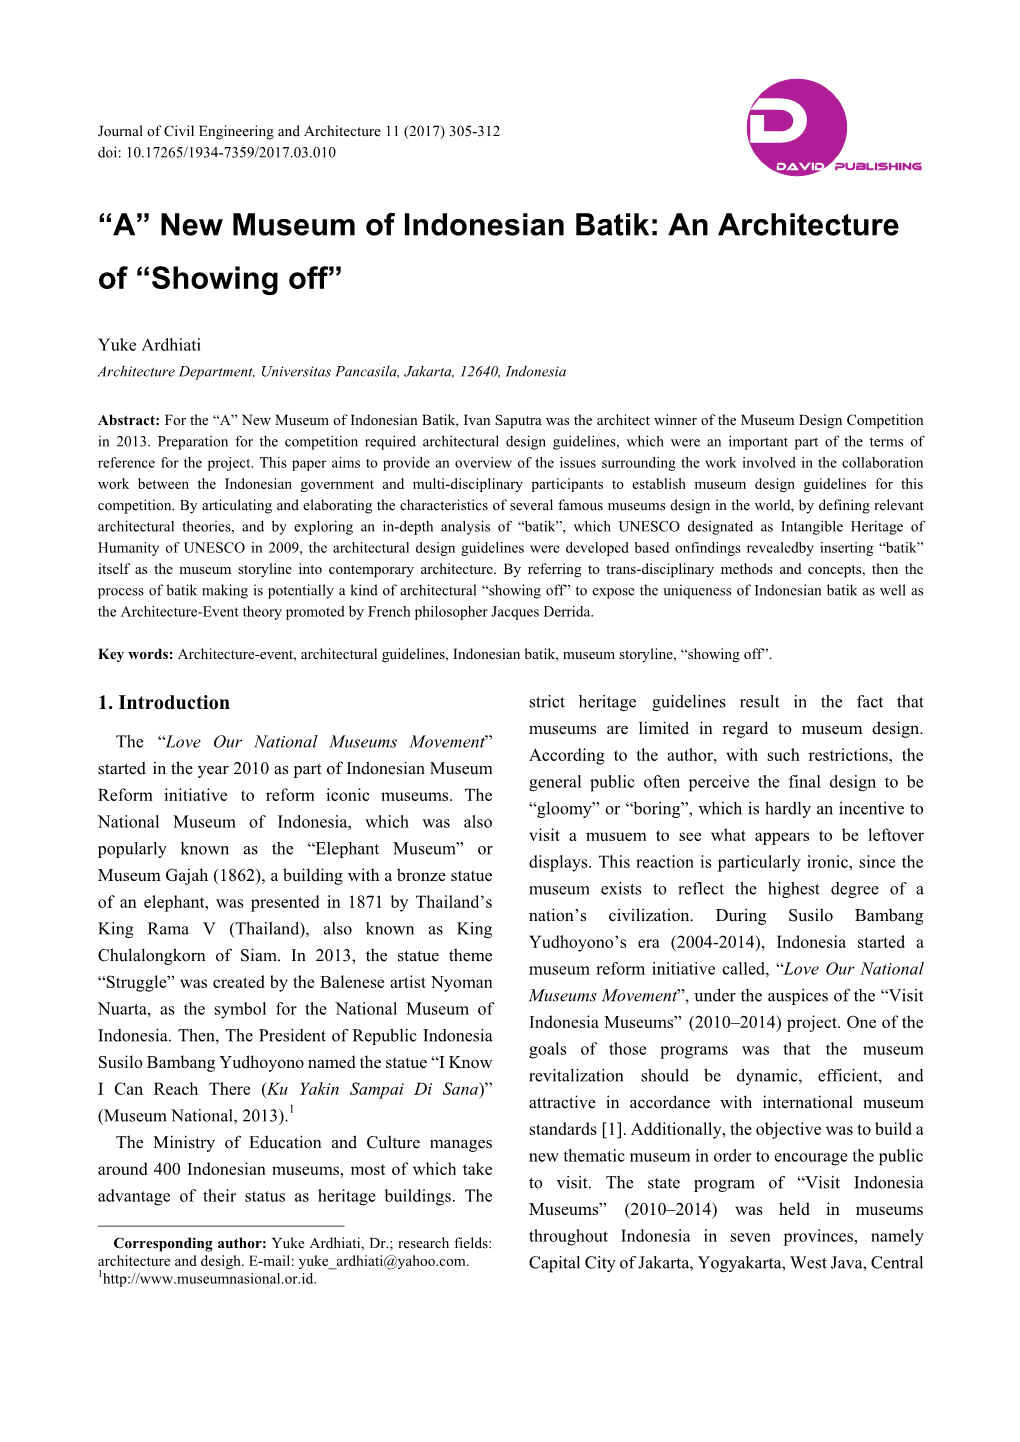 “A” New Museum of Indonesian Batik: an Architecture of “Showing Off”